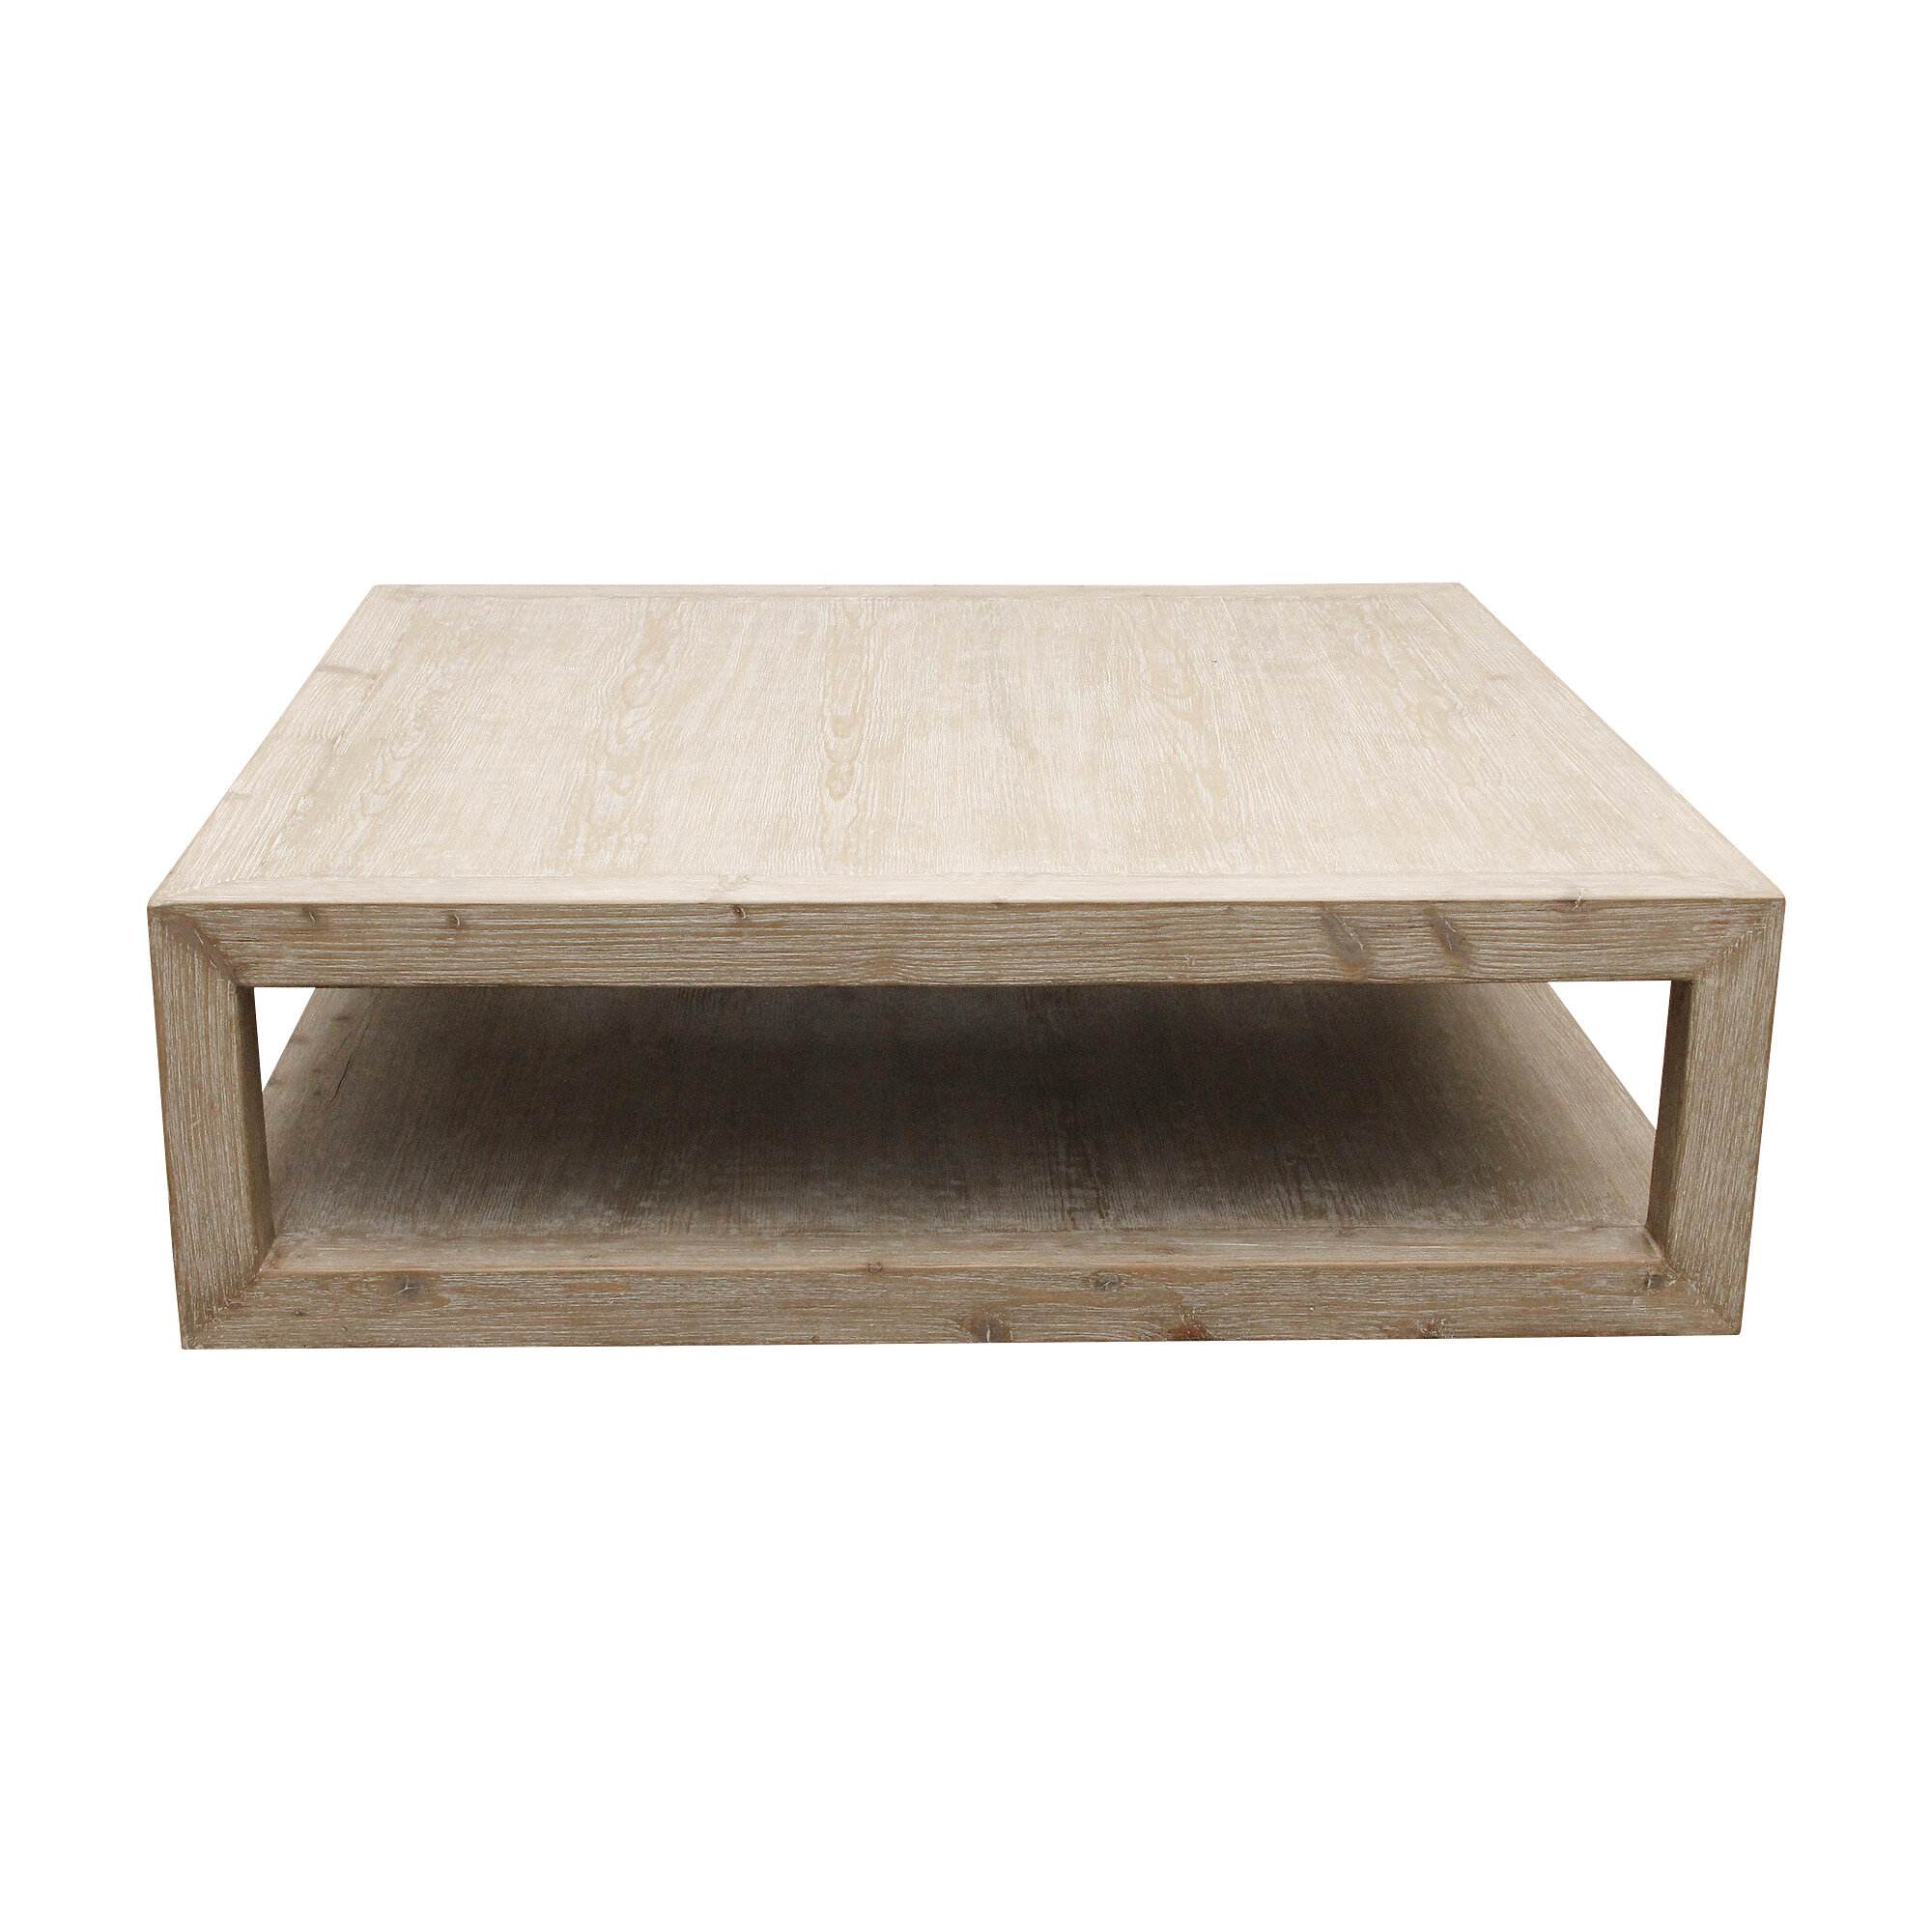 Lilys Living Versatile Peking Grand Framed Square Coffee Table With Weathered White Wash